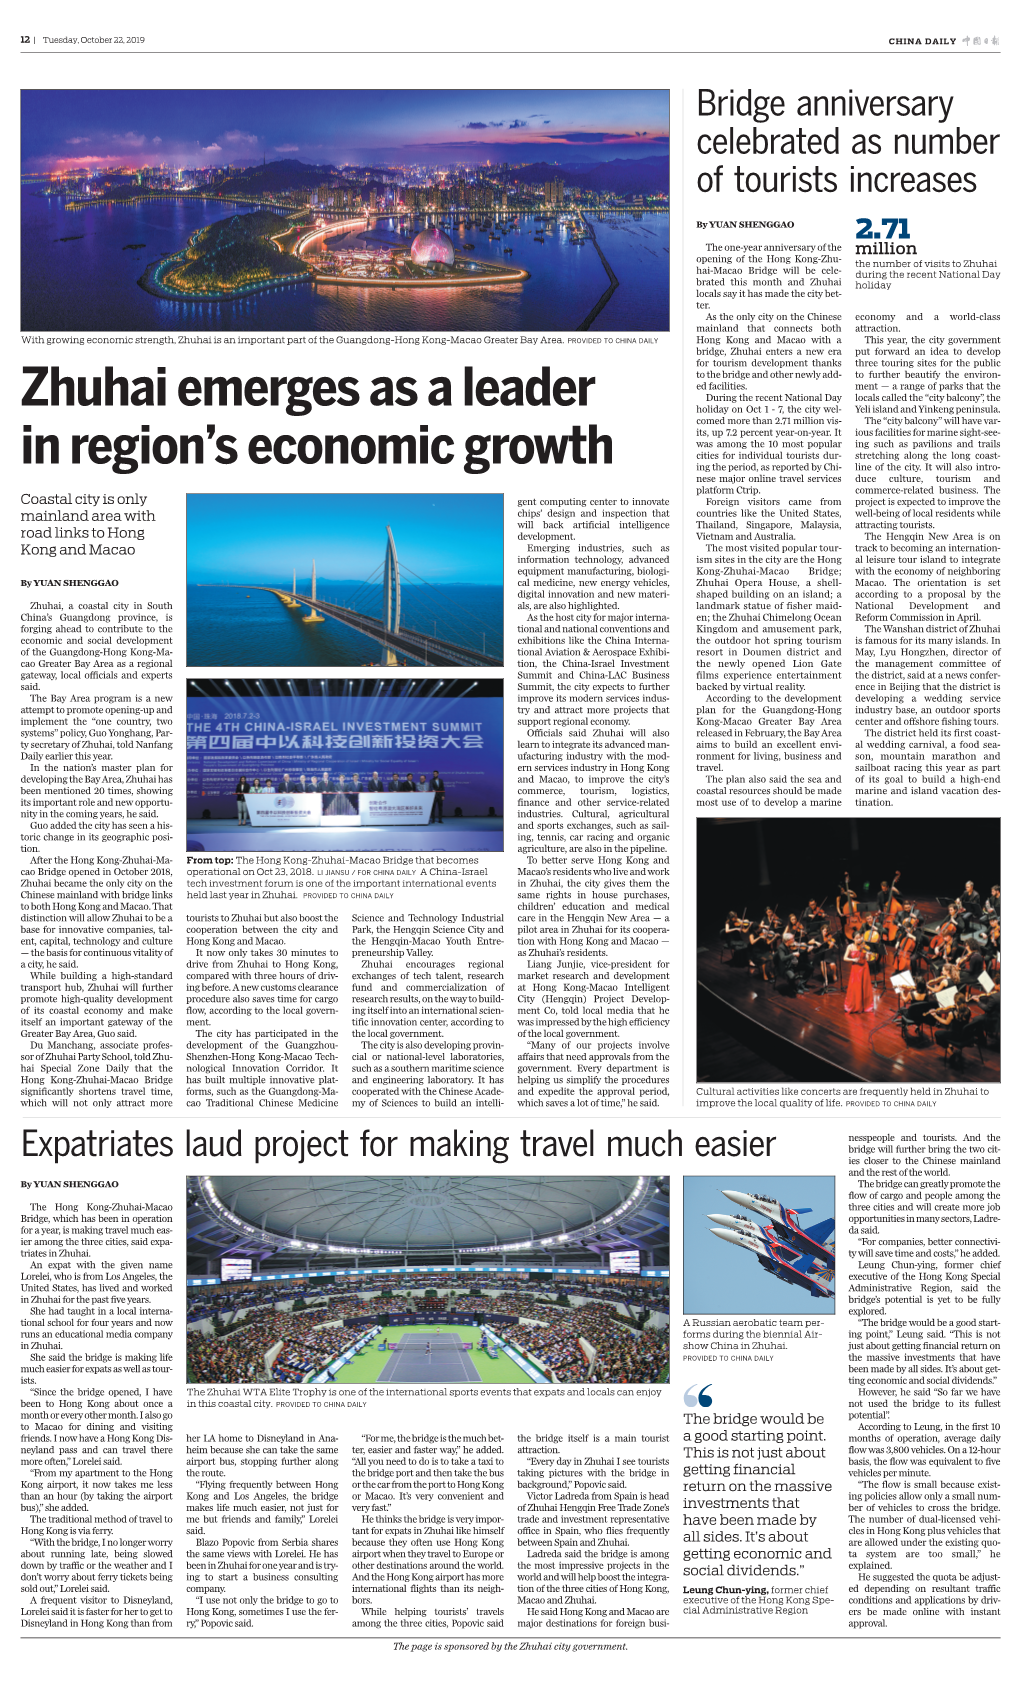 Zhuhai Emerges As a Leader in Region's Economic Growth